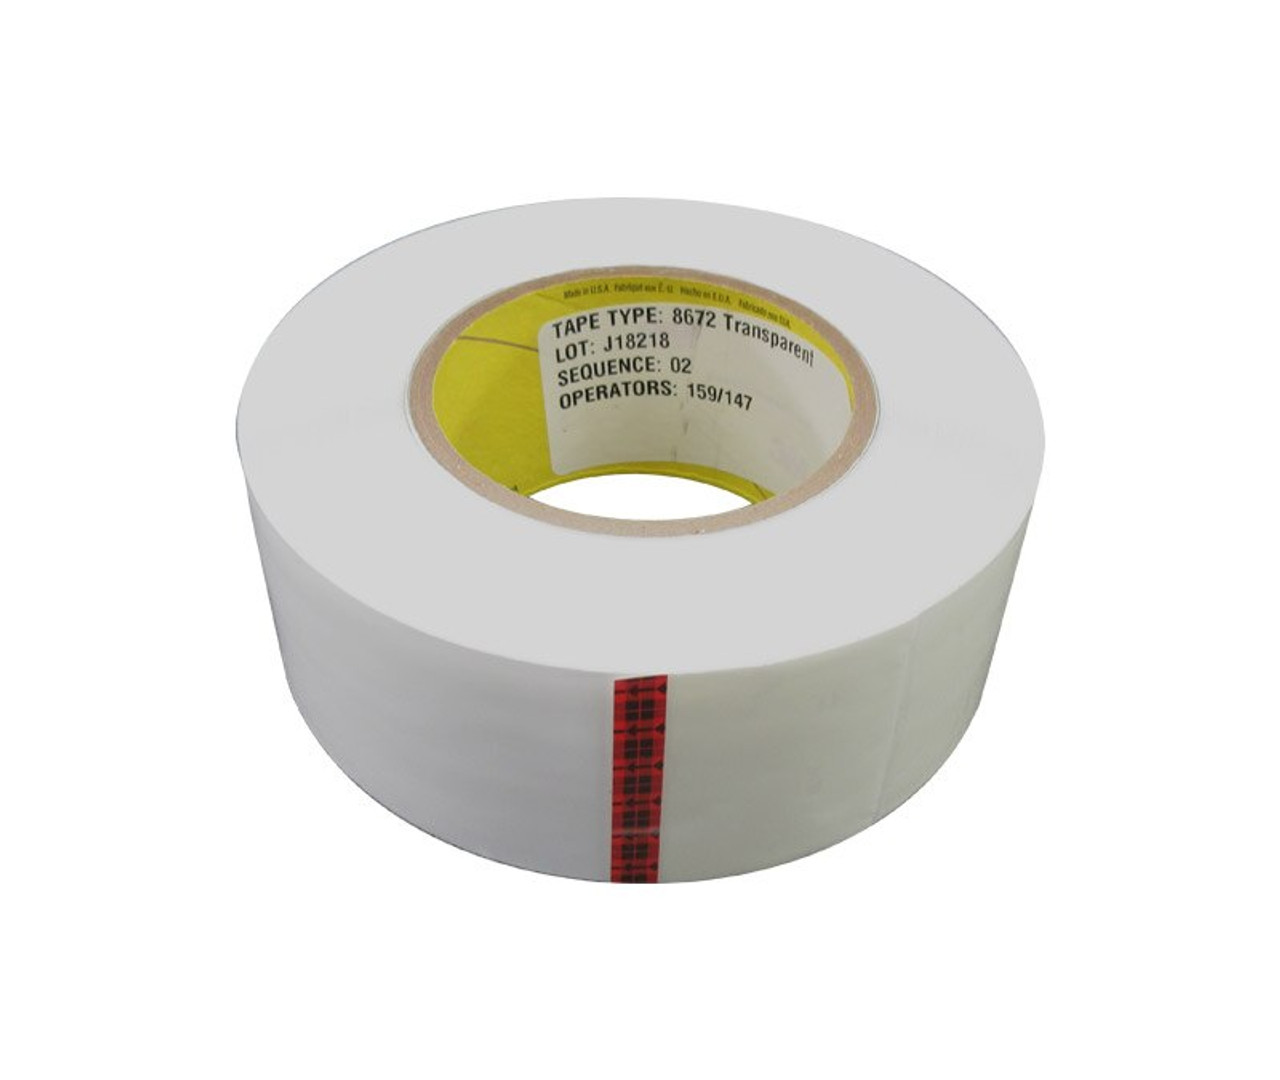 3M™ Removable Repositionable Tape 665, Clear, 1 in x 72 yd, 3.8 mil